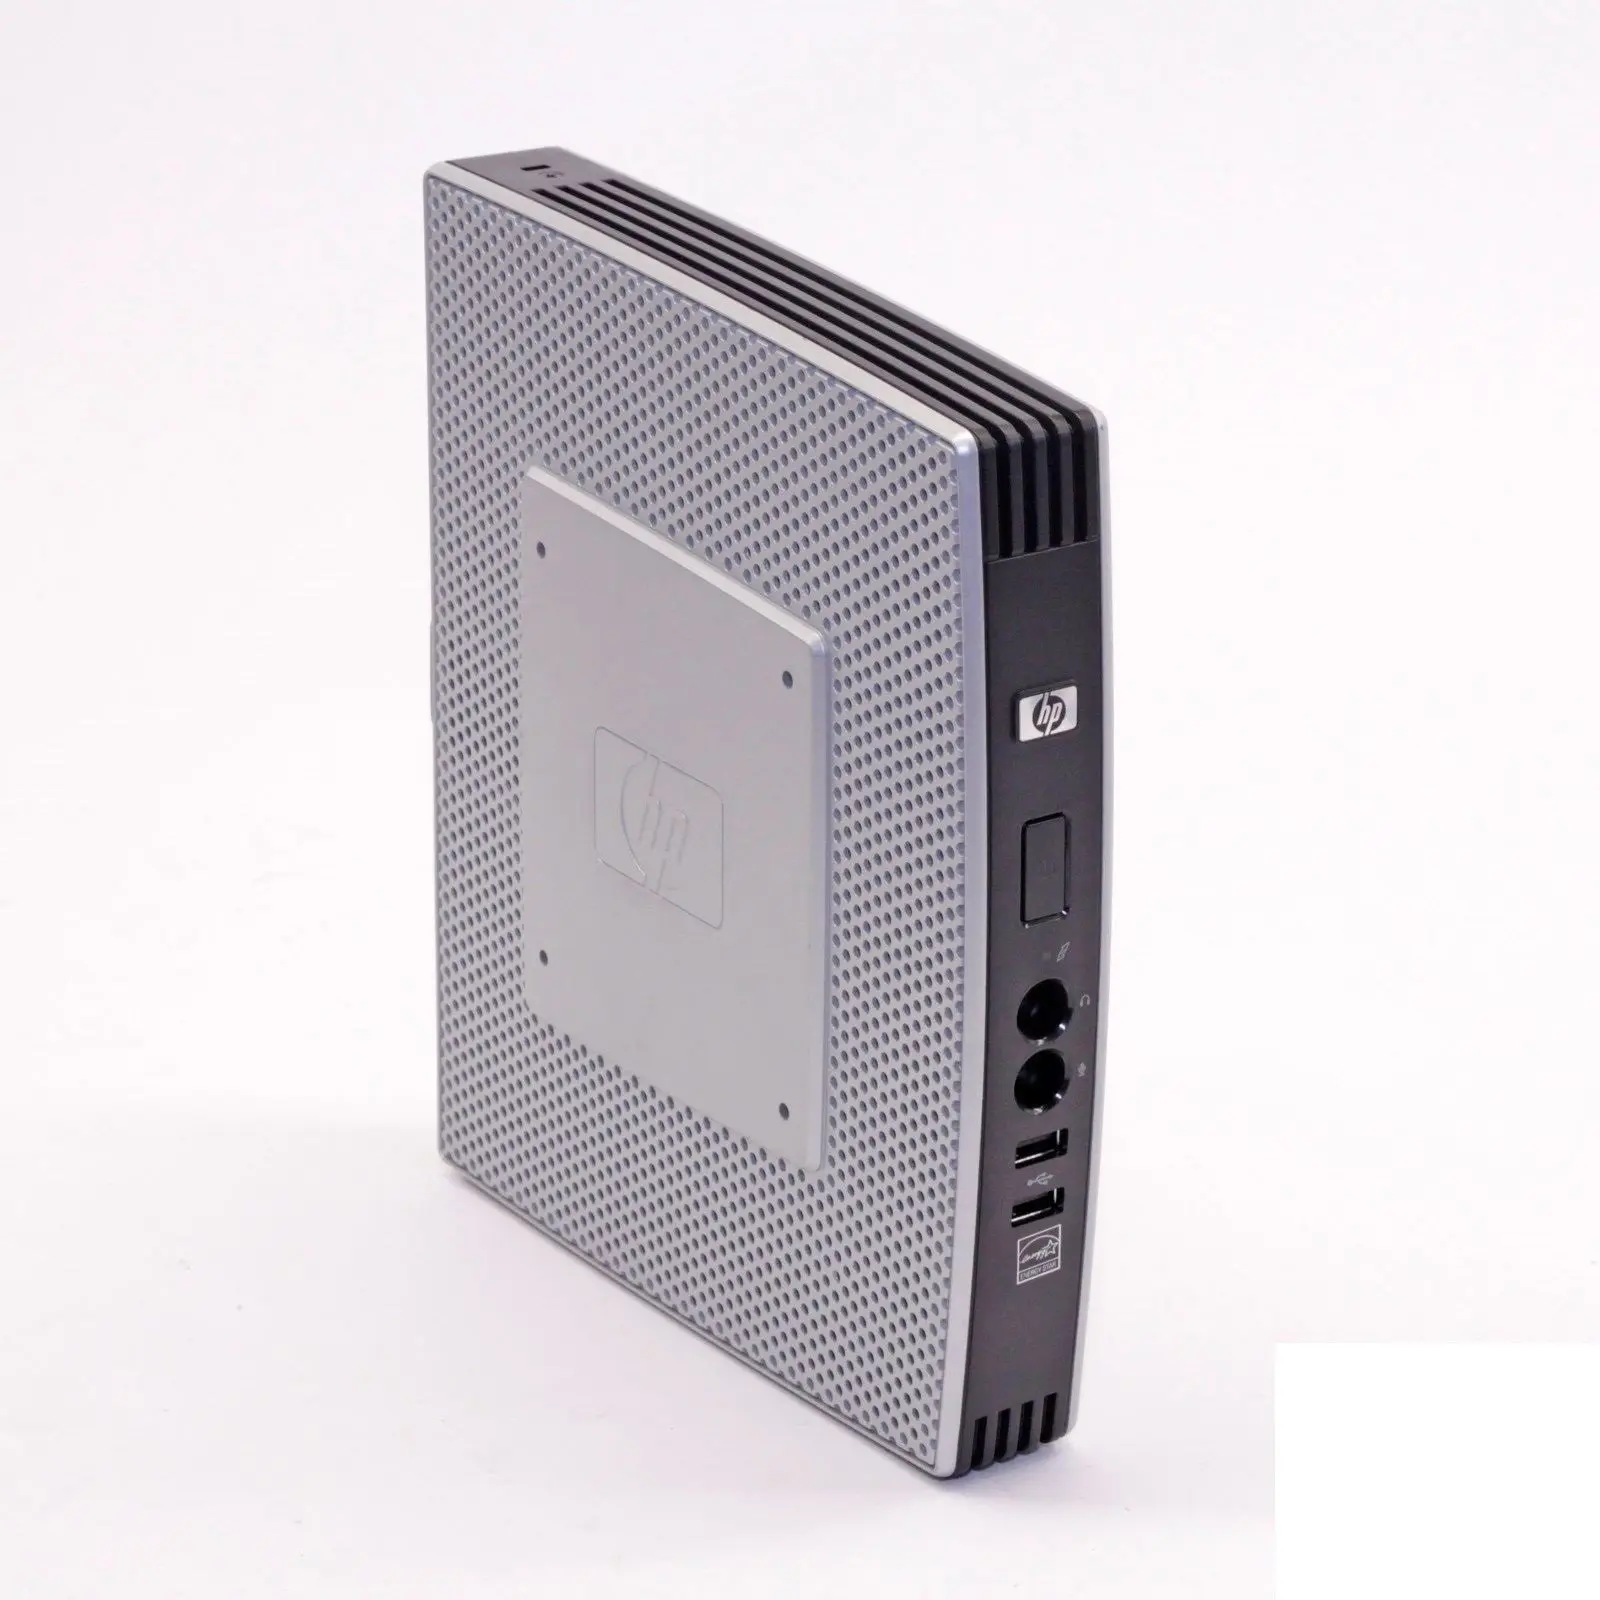 Hp thin client t5740: reliable internet connectivity & seamless computing